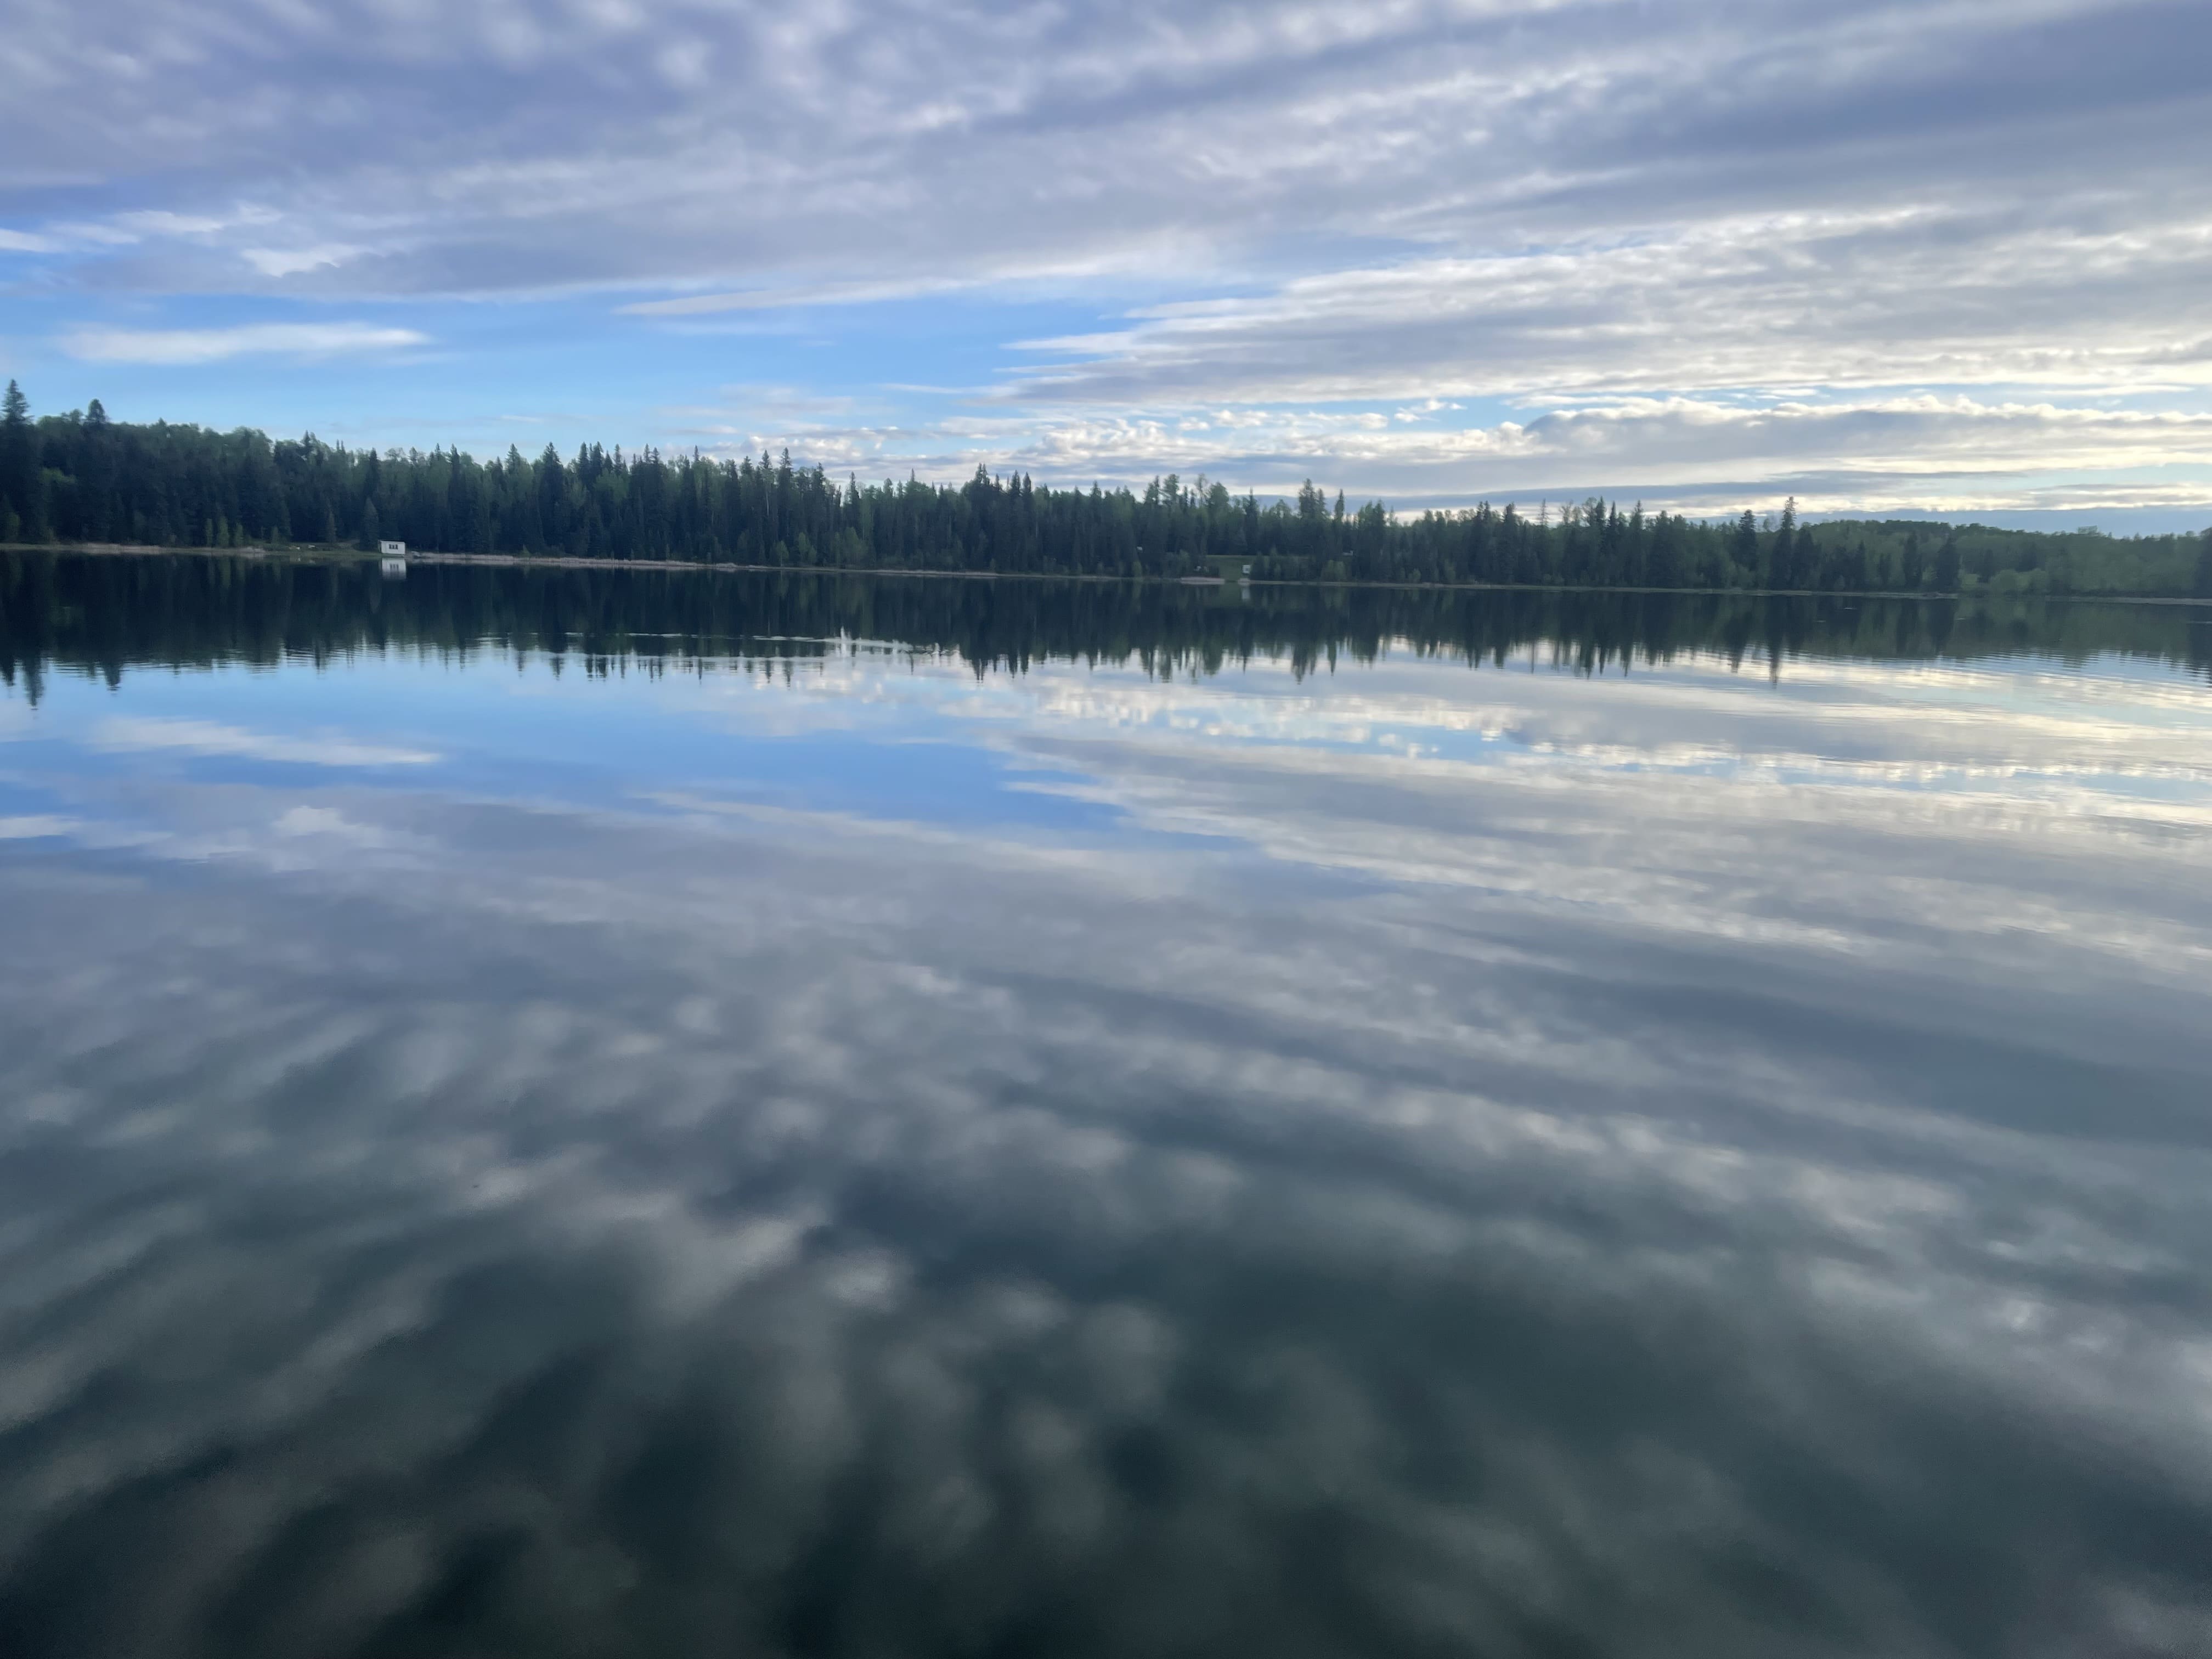 Reflection of clouds and shoreline trees in the calm waters of Strubel Lake.